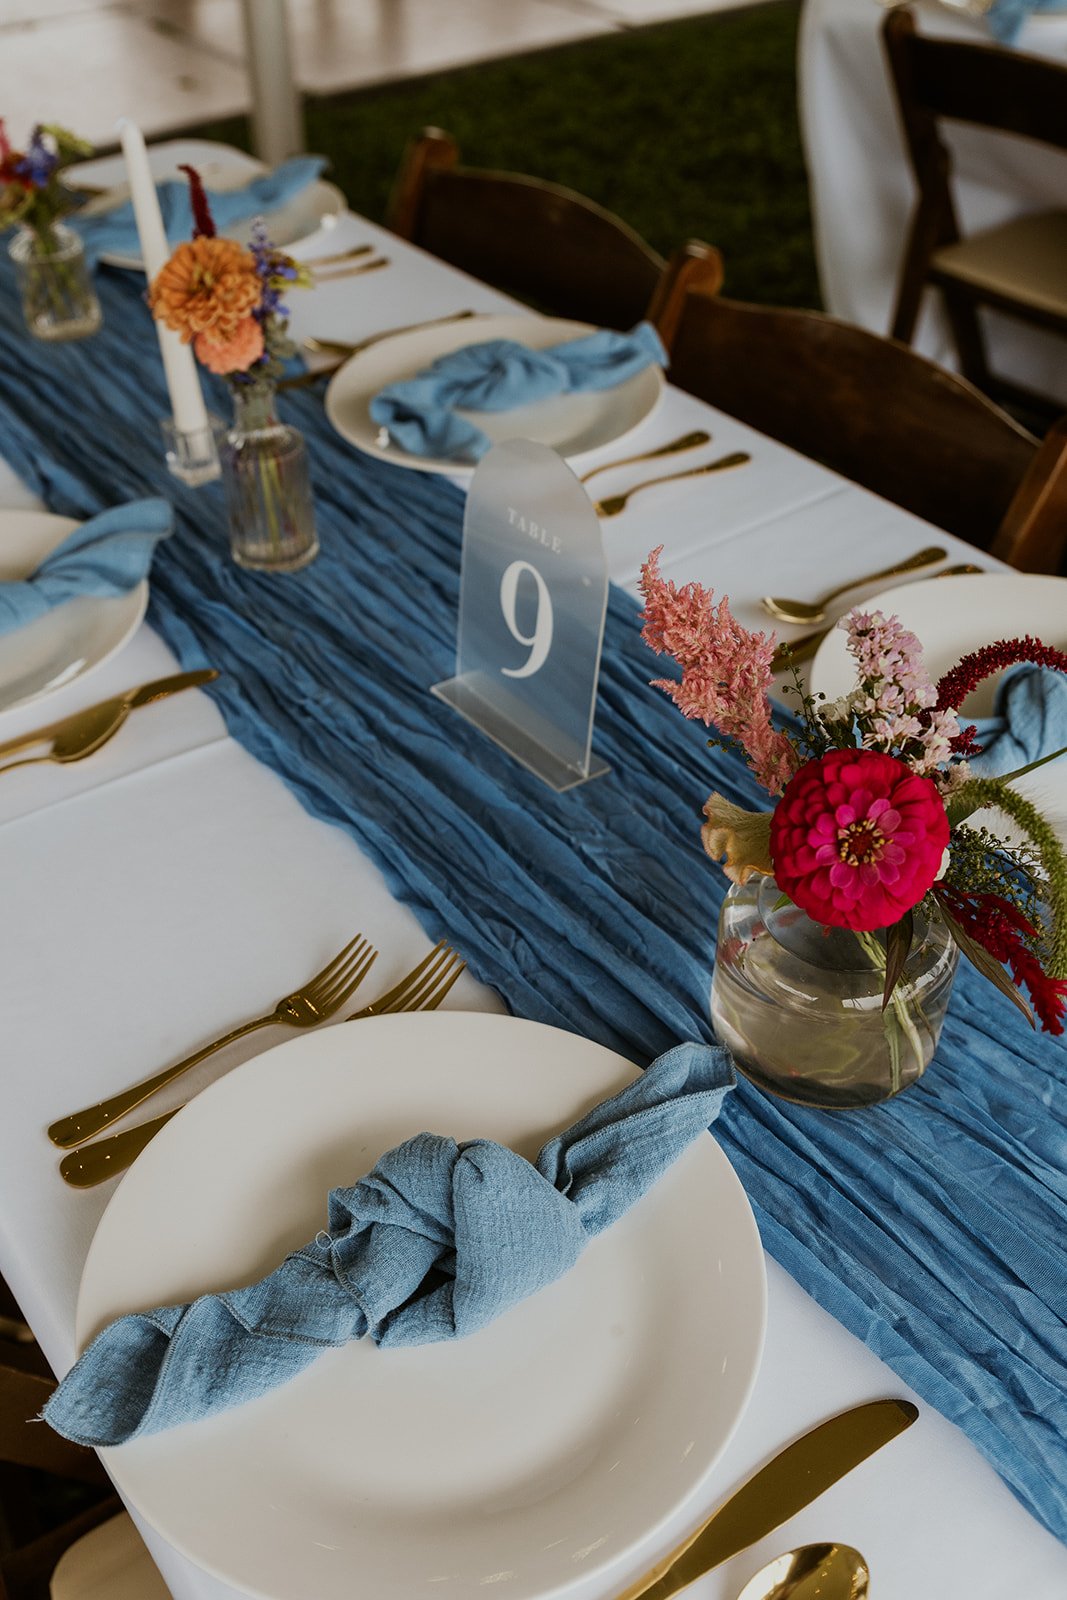 The table setting's decorated with touches of gold, light blue and bright fuchsia and pink florals.